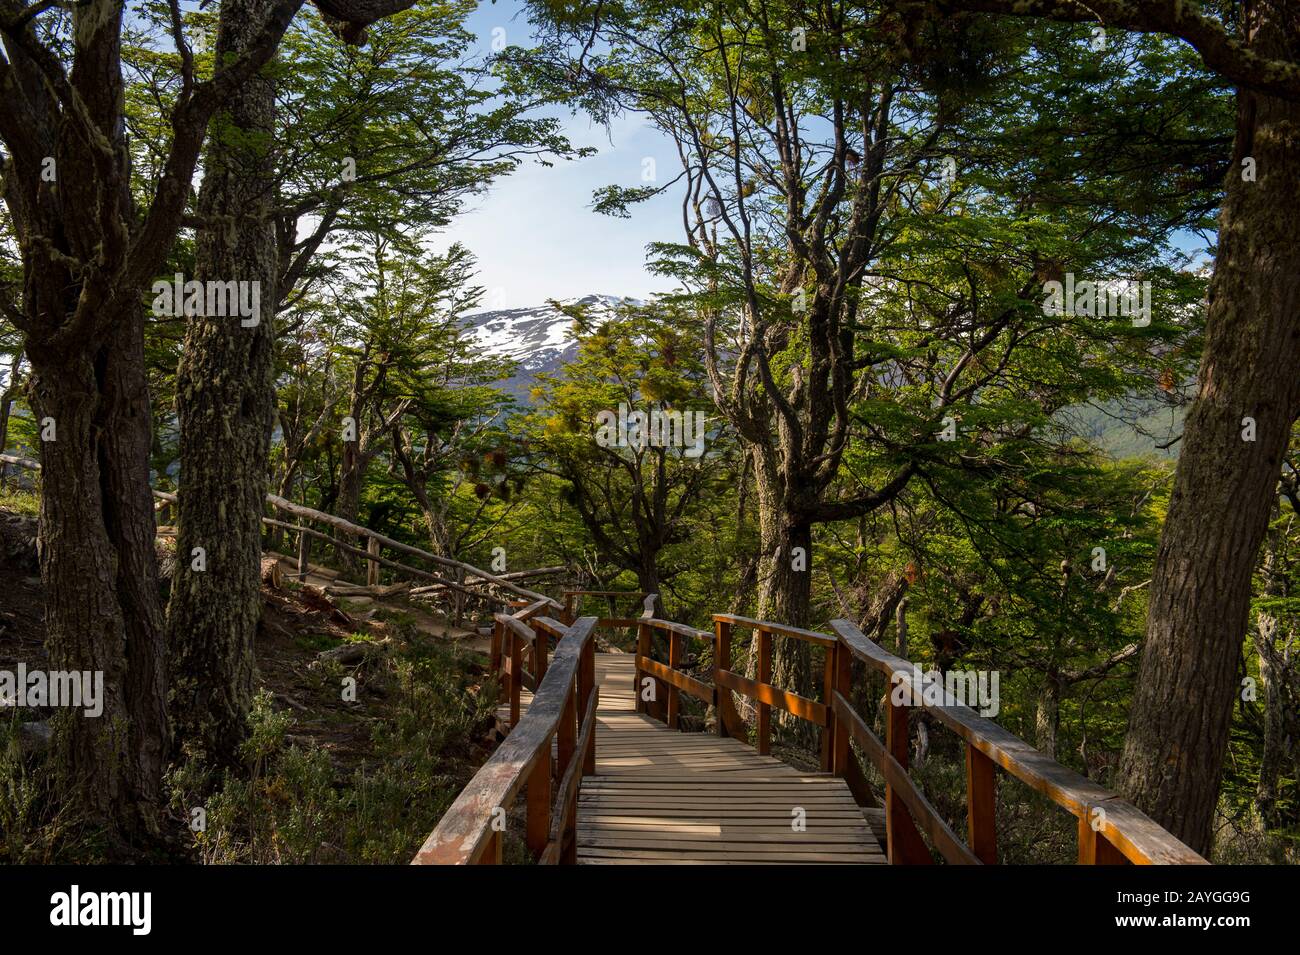 A boardwalk inside the Southern beech forest at Bahia Lapataia (Lapataia Bay) near Ushuaia on Tierra del Fuego in Argentina. Stock Photo